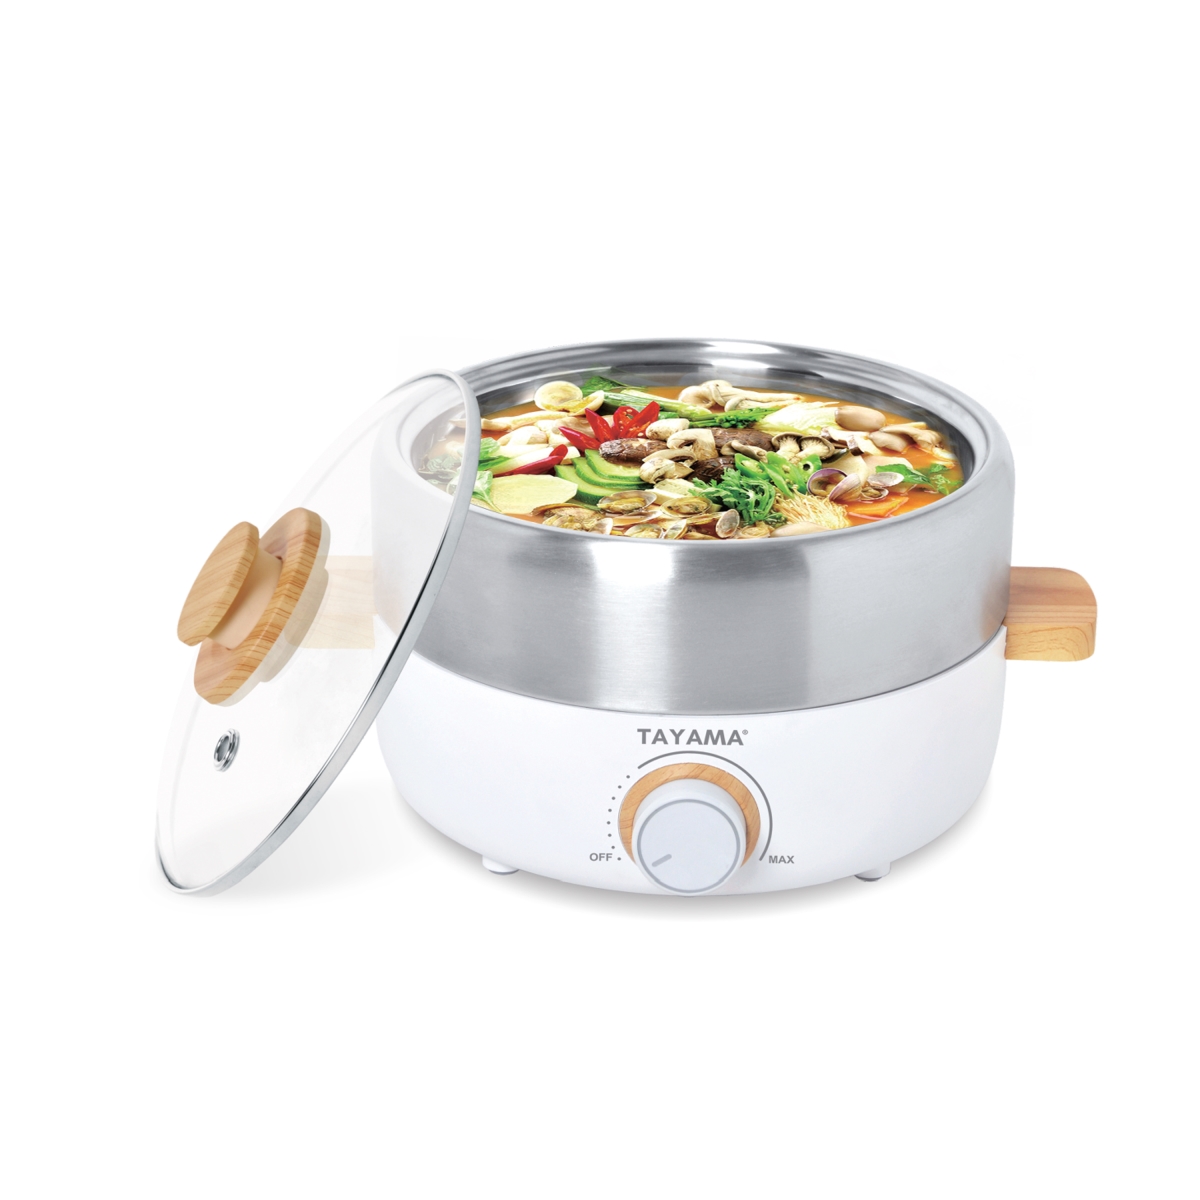 Picture of Tayama TRMC-30W 2.5 qt. Nonstick Multi-Cooker Hot Pot & Grill